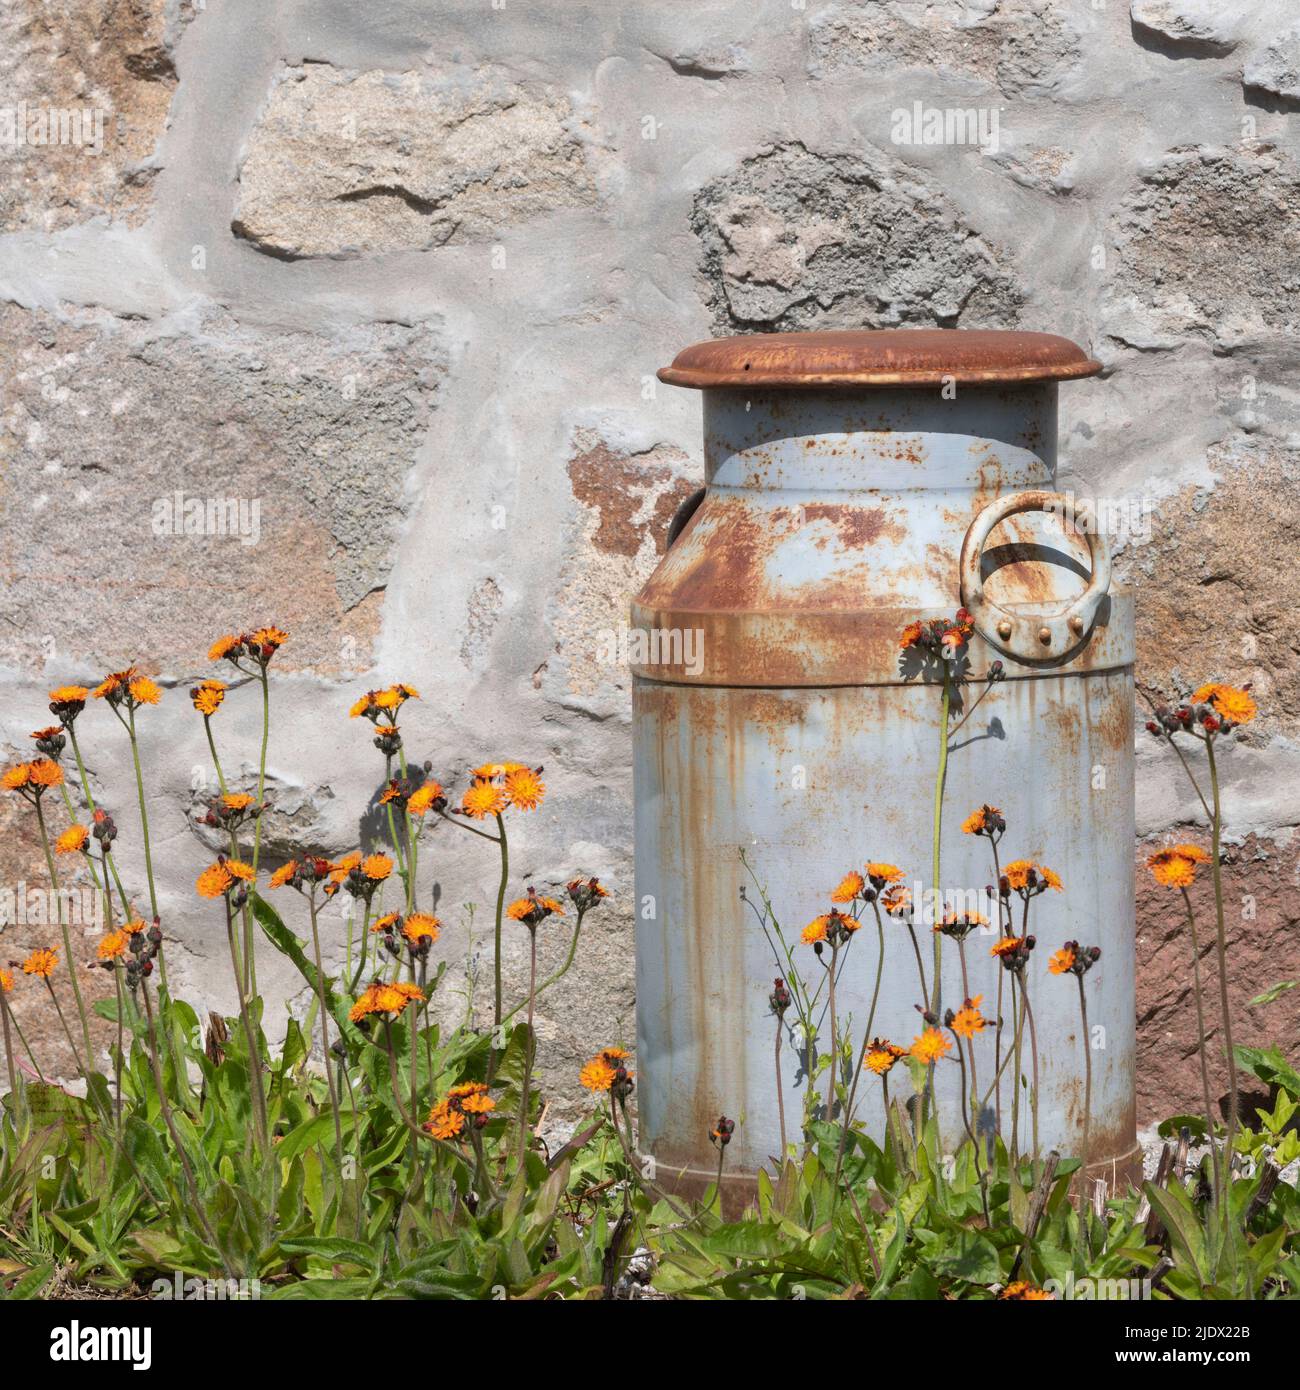 A Rusting Old Milk Churn Surrounded by the Wild Flower Fox-and-Cubs (Hieracium Aurantiacum), or Devil's Paintbrush, in Summer Sunshine Stock Photo